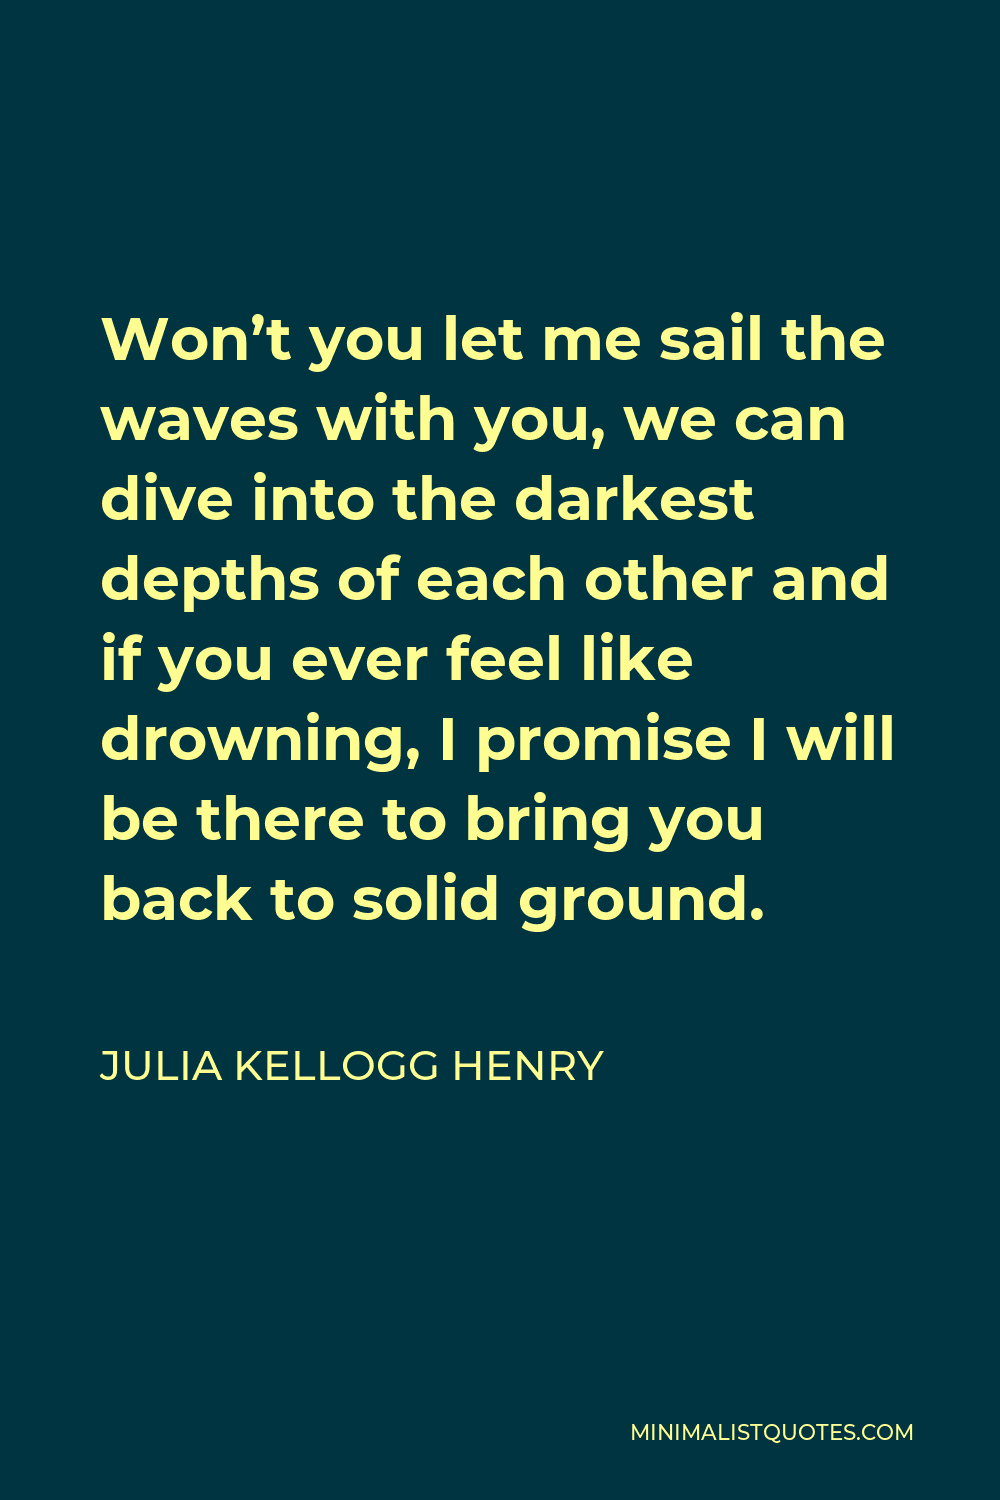 Julia Kellogg Henry Quote - Won’t you let me sail the waves with you, we can dive into the darkest depths of each other and if you ever feel like drowning, I promise I will be there to bring you back to solid ground.